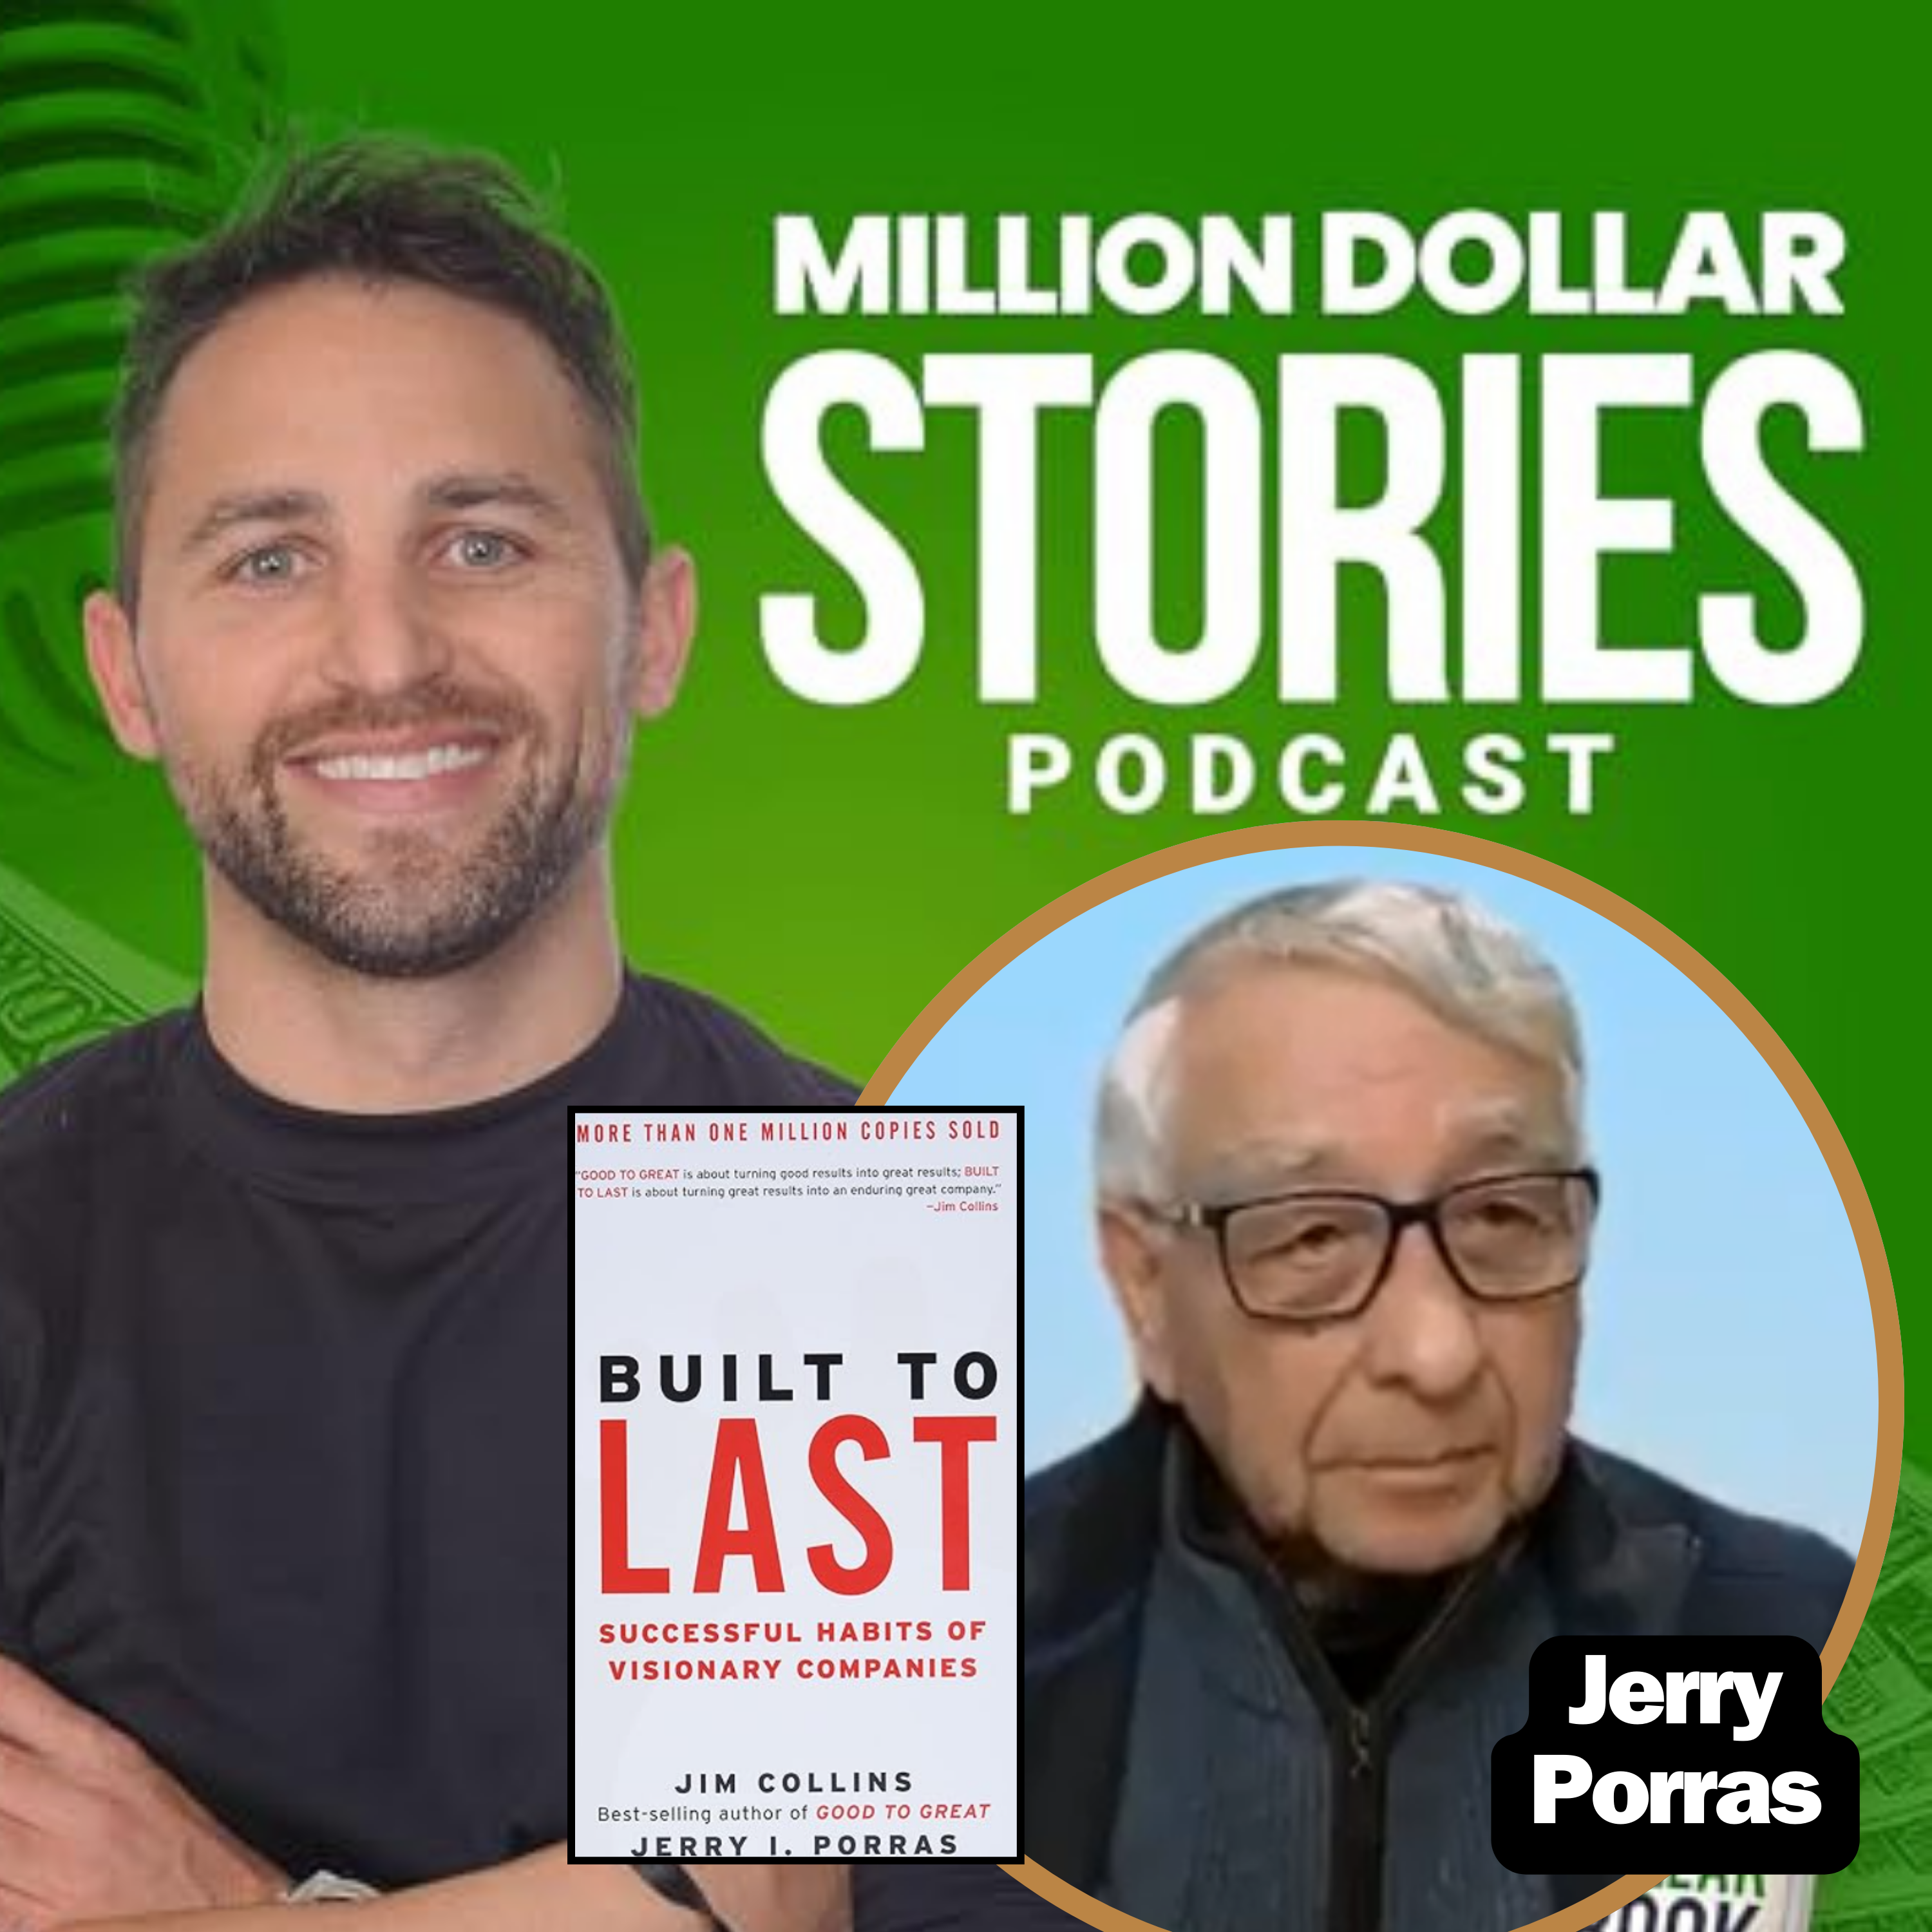 Jerry Porras – Author of “Built to Last: Successful Habits of Visionary Companies(Good to Great, 2)”